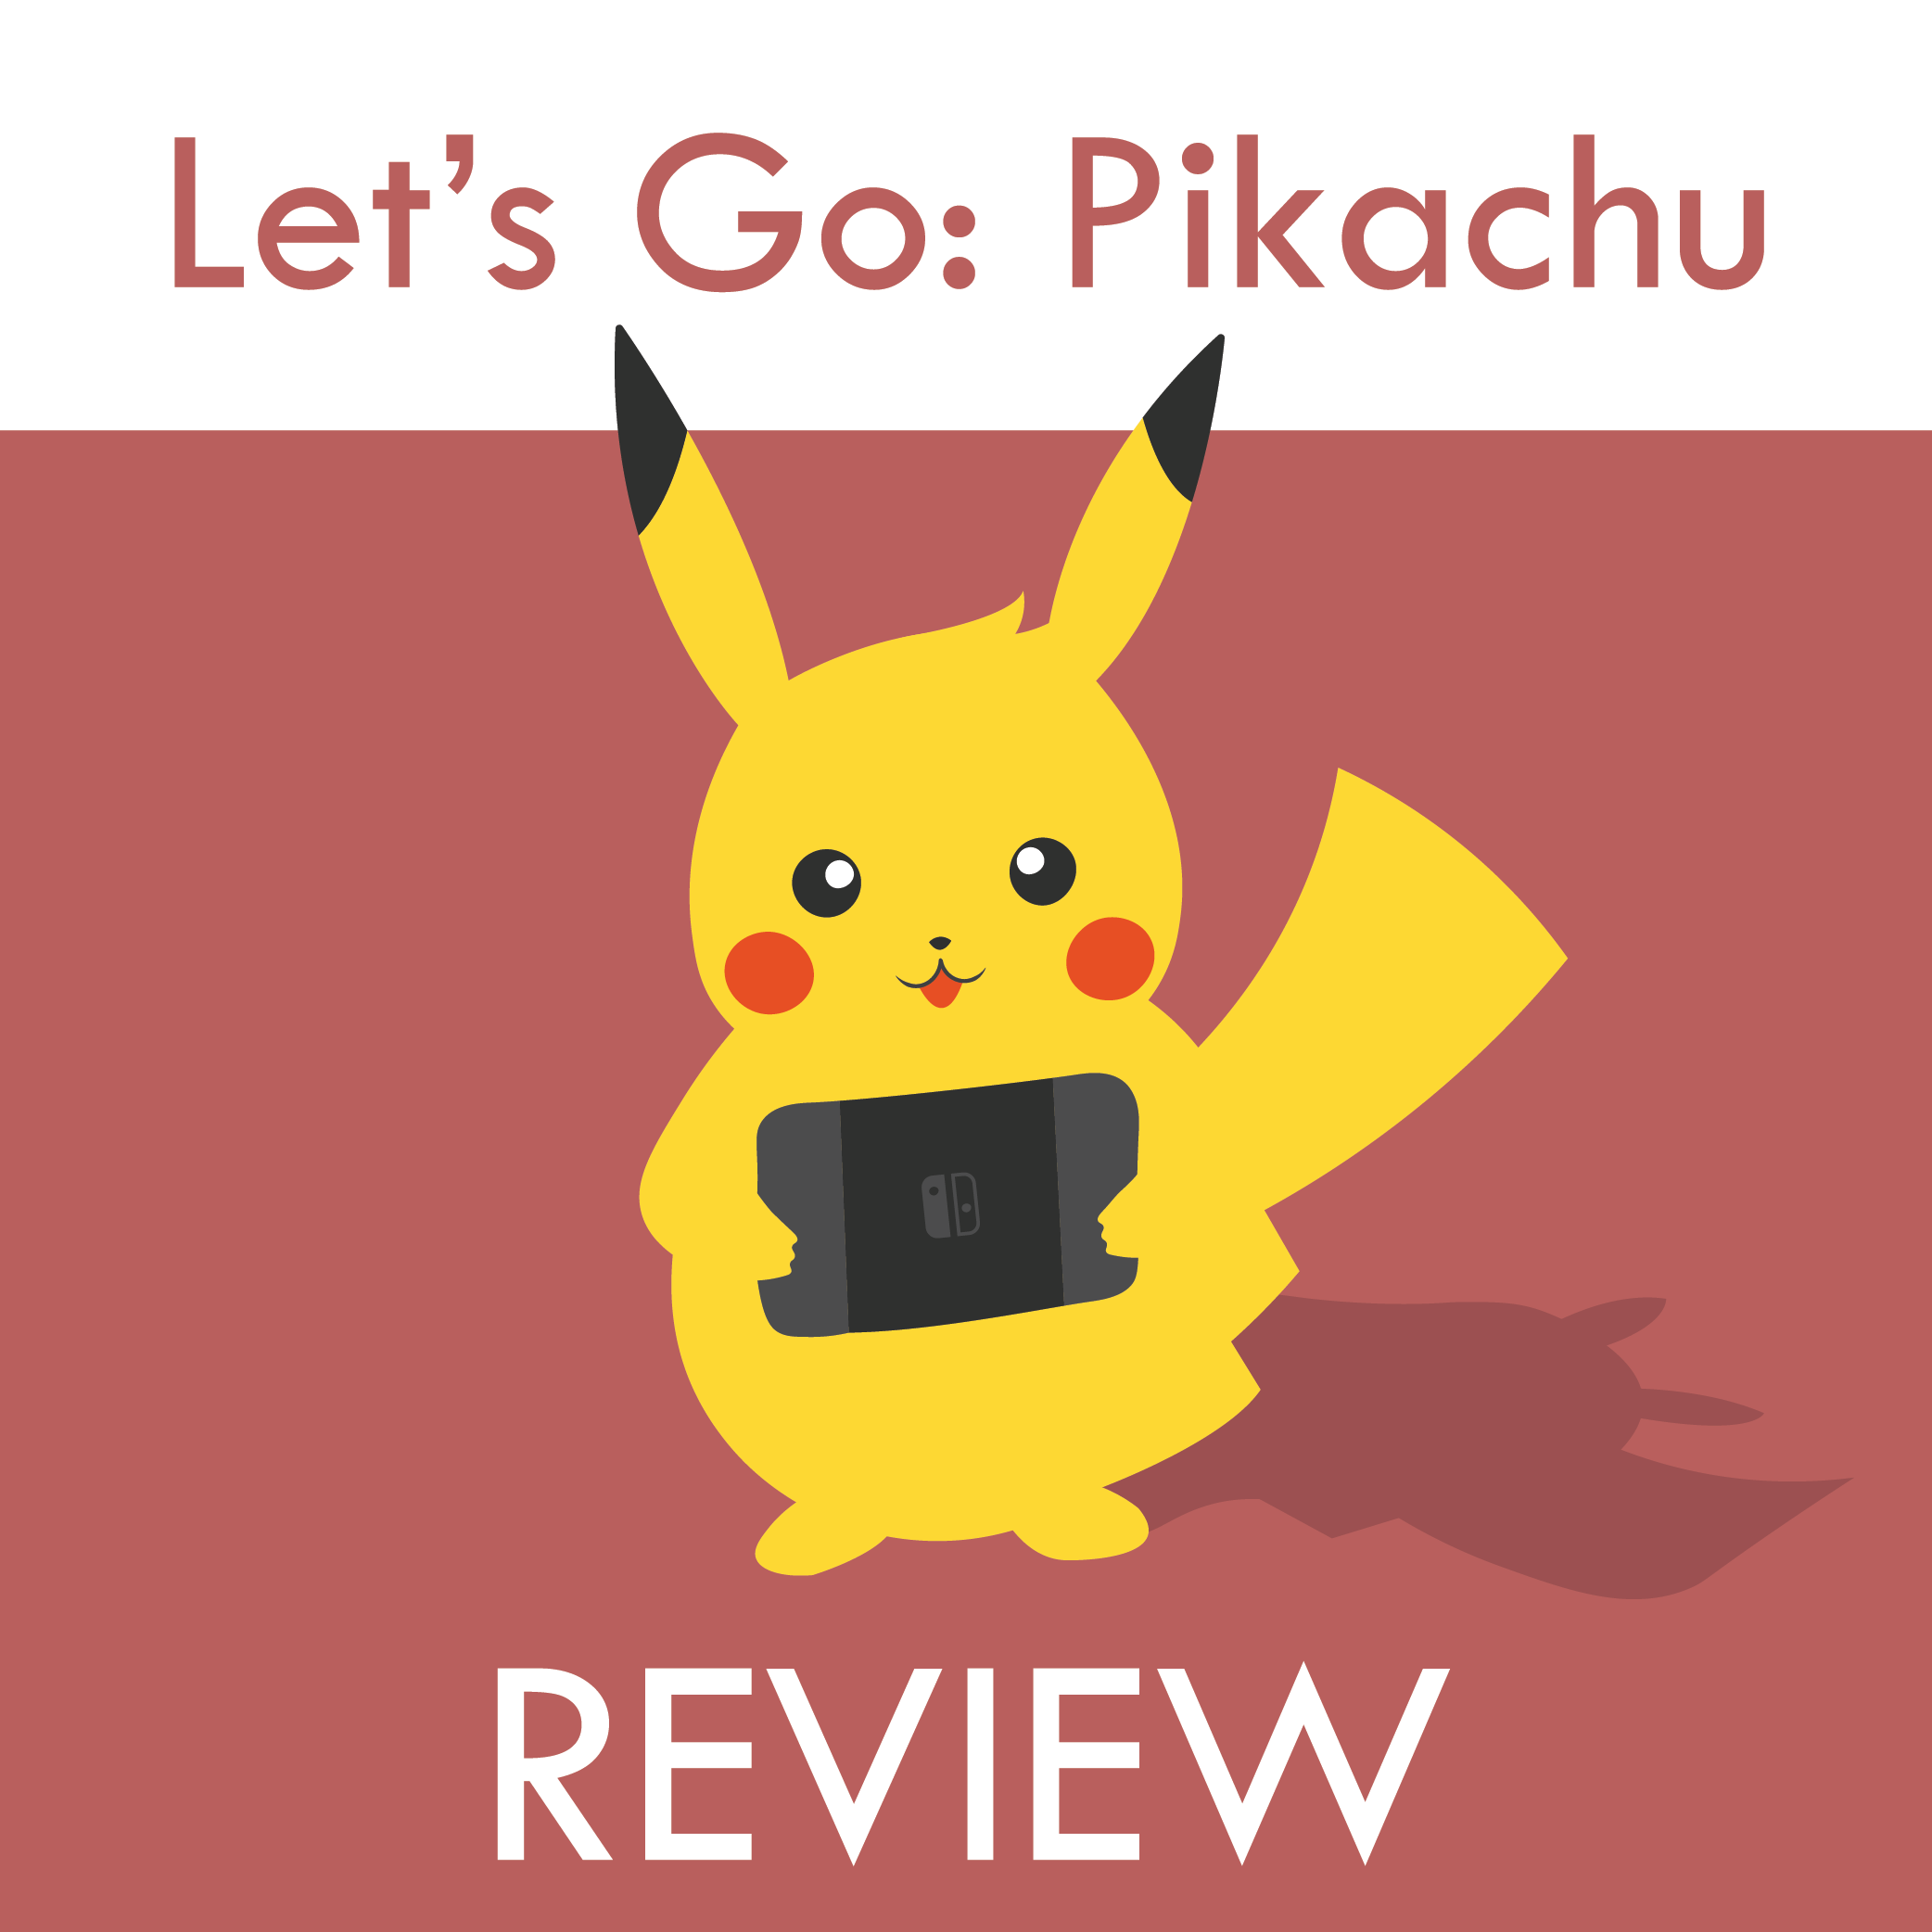 GRAPHIC: Pikachu plays Let's Go on a Nintendo Switch with a red background. Graphic by The Signal Reporter Bryan Sullivan.